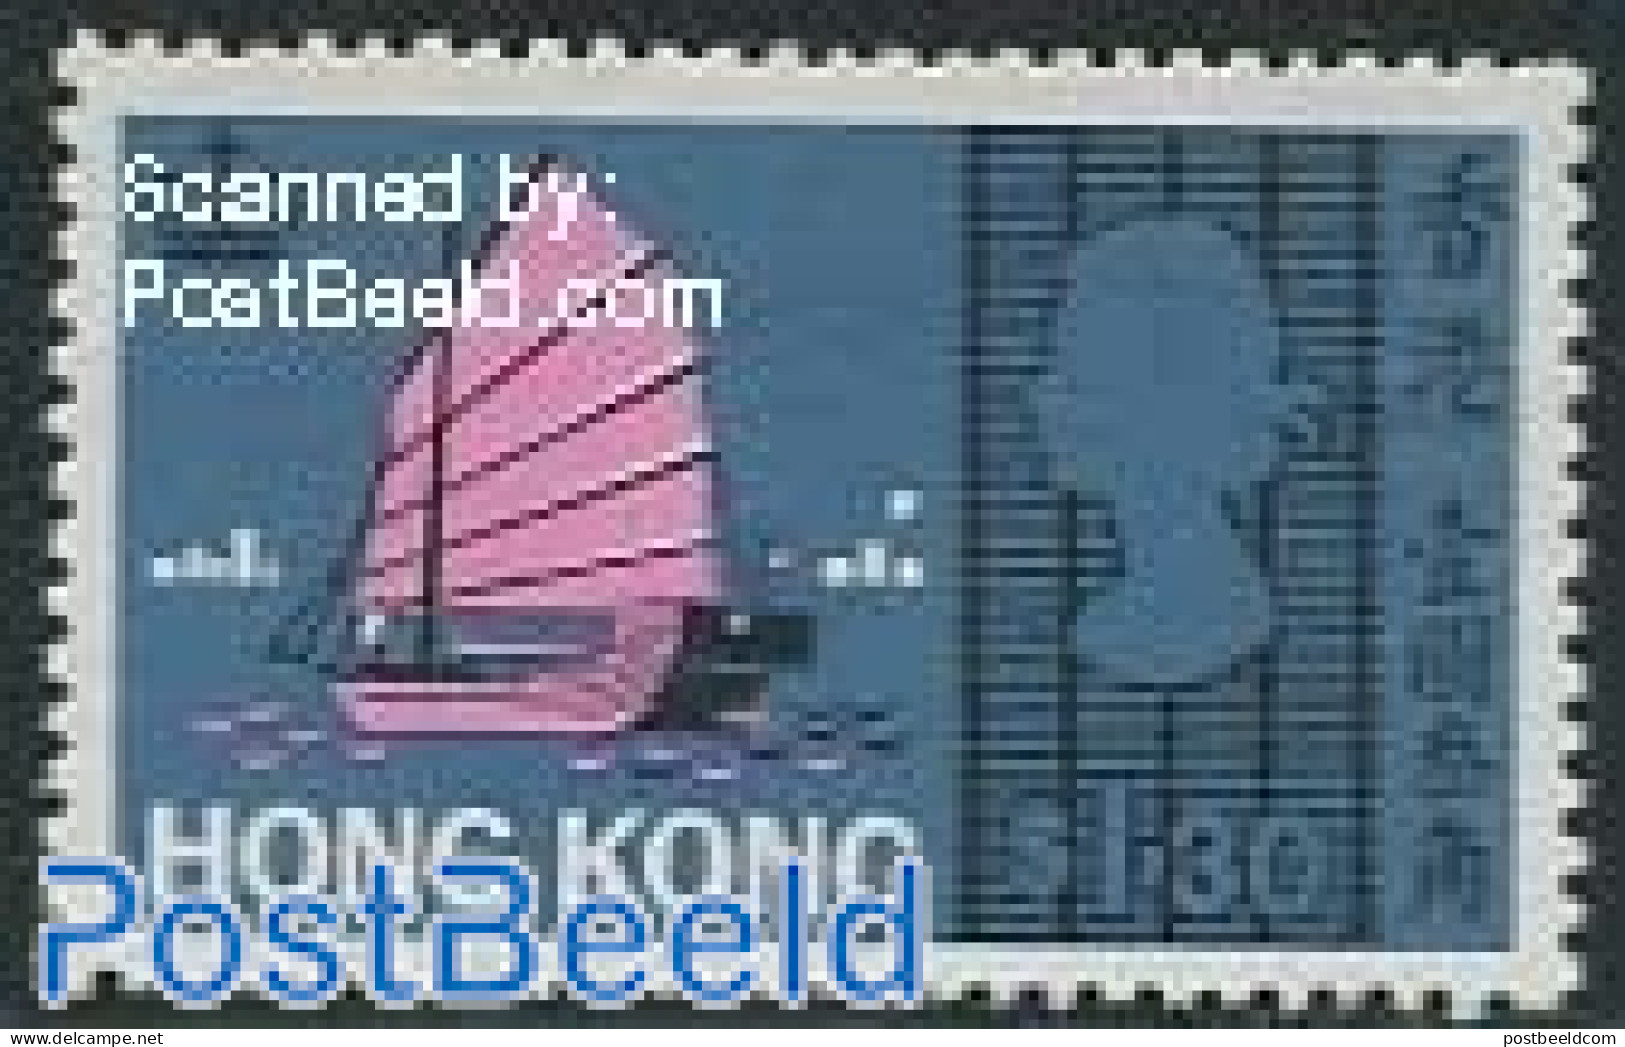 Hong Kong 1968 1.30, Stamp Out Of Set, Mint NH, Transport - Ships And Boats - Neufs